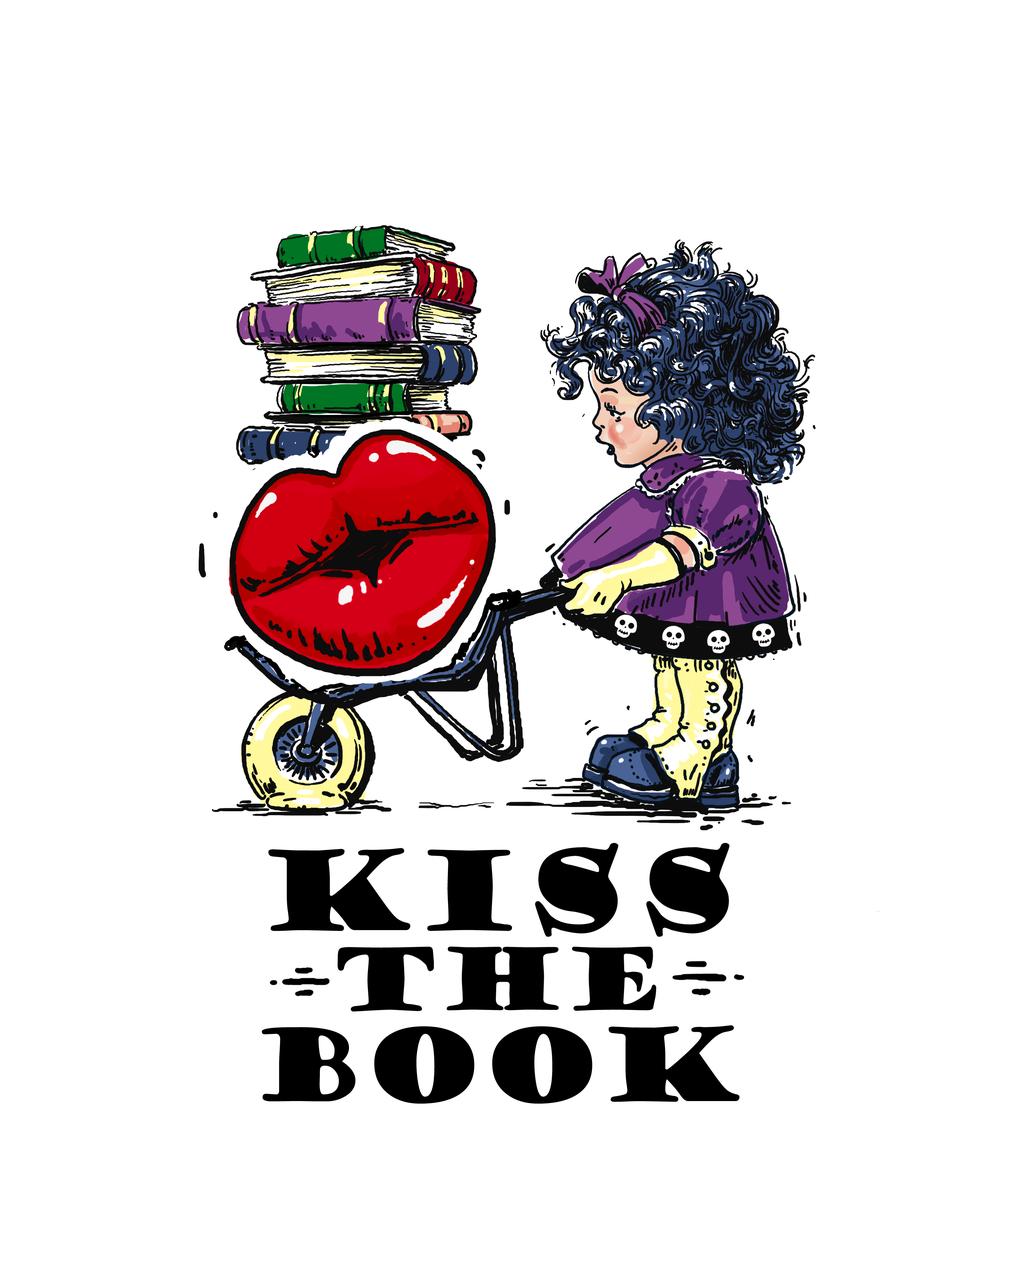 2016 Kiss the Book Elementary New Books in a Series Adderson, Caroline Jasper John Dooley: Not in Love. CHAPTER BOOK. Kids Can Press, Limited, 2015. $15.95. Content: G. ESSENTIAL. EL (K- 3).